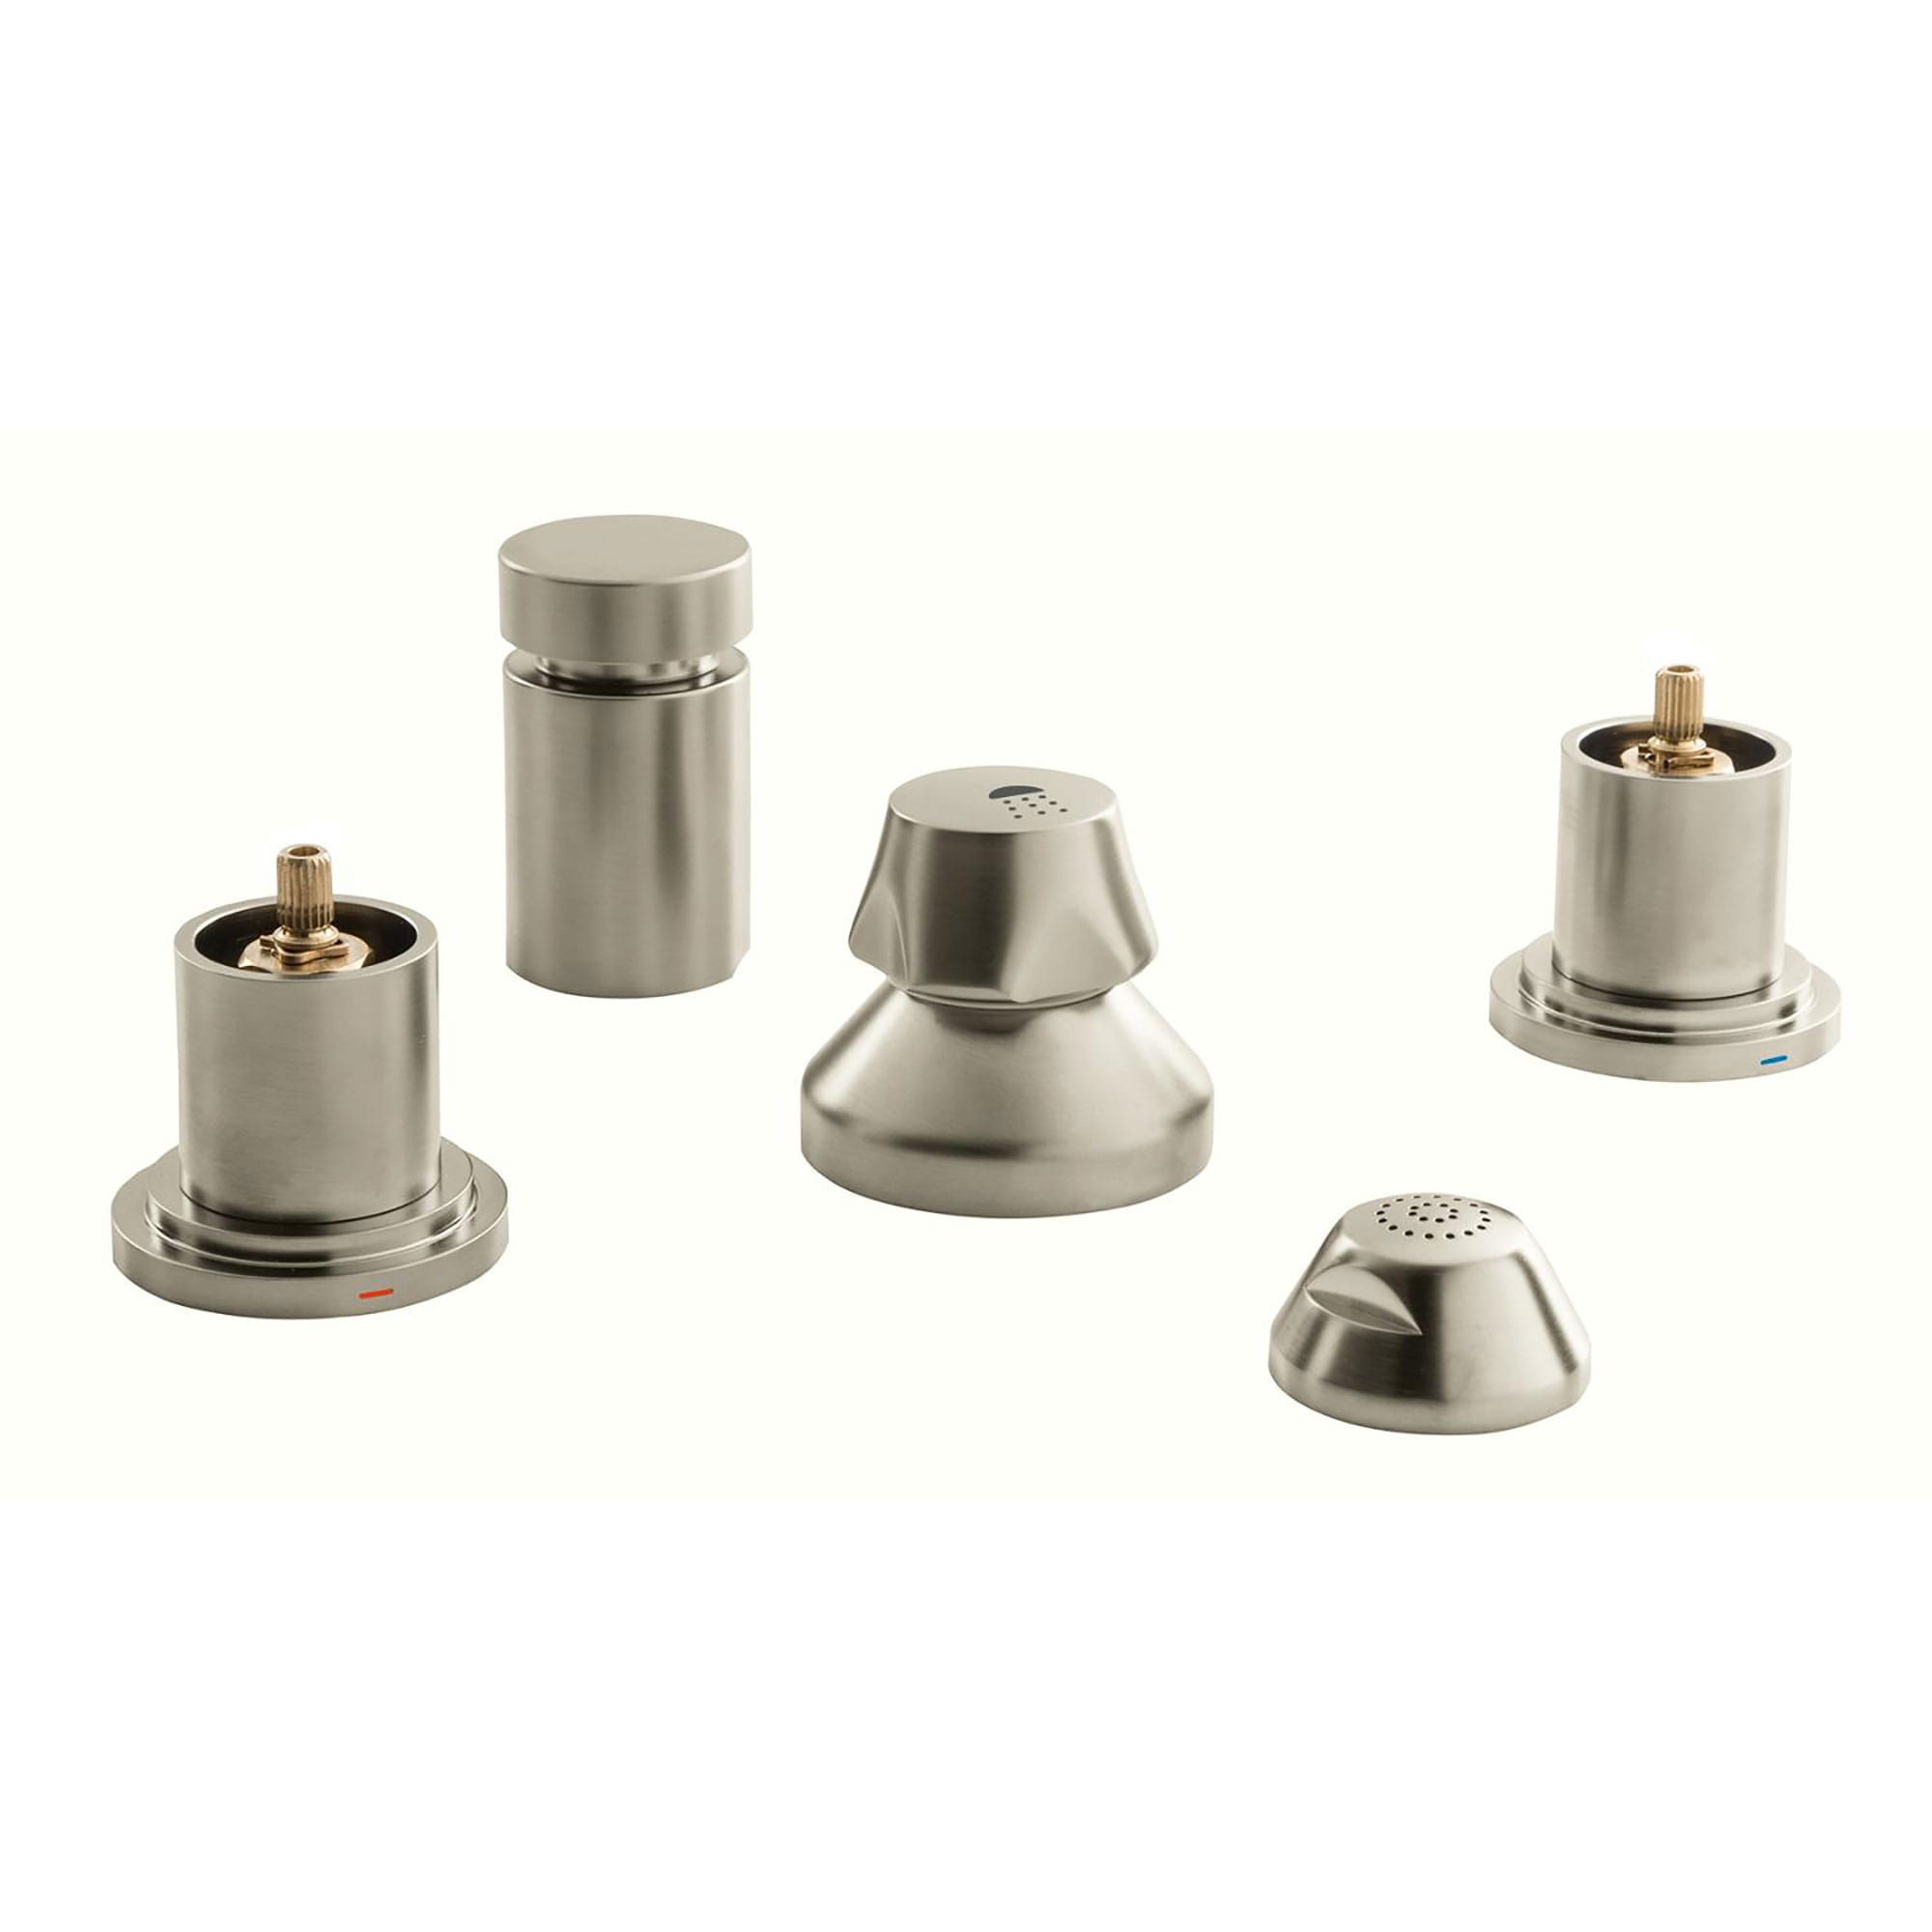 Batterie 3 trousTaille M GROHE BRUSHED NICKEL